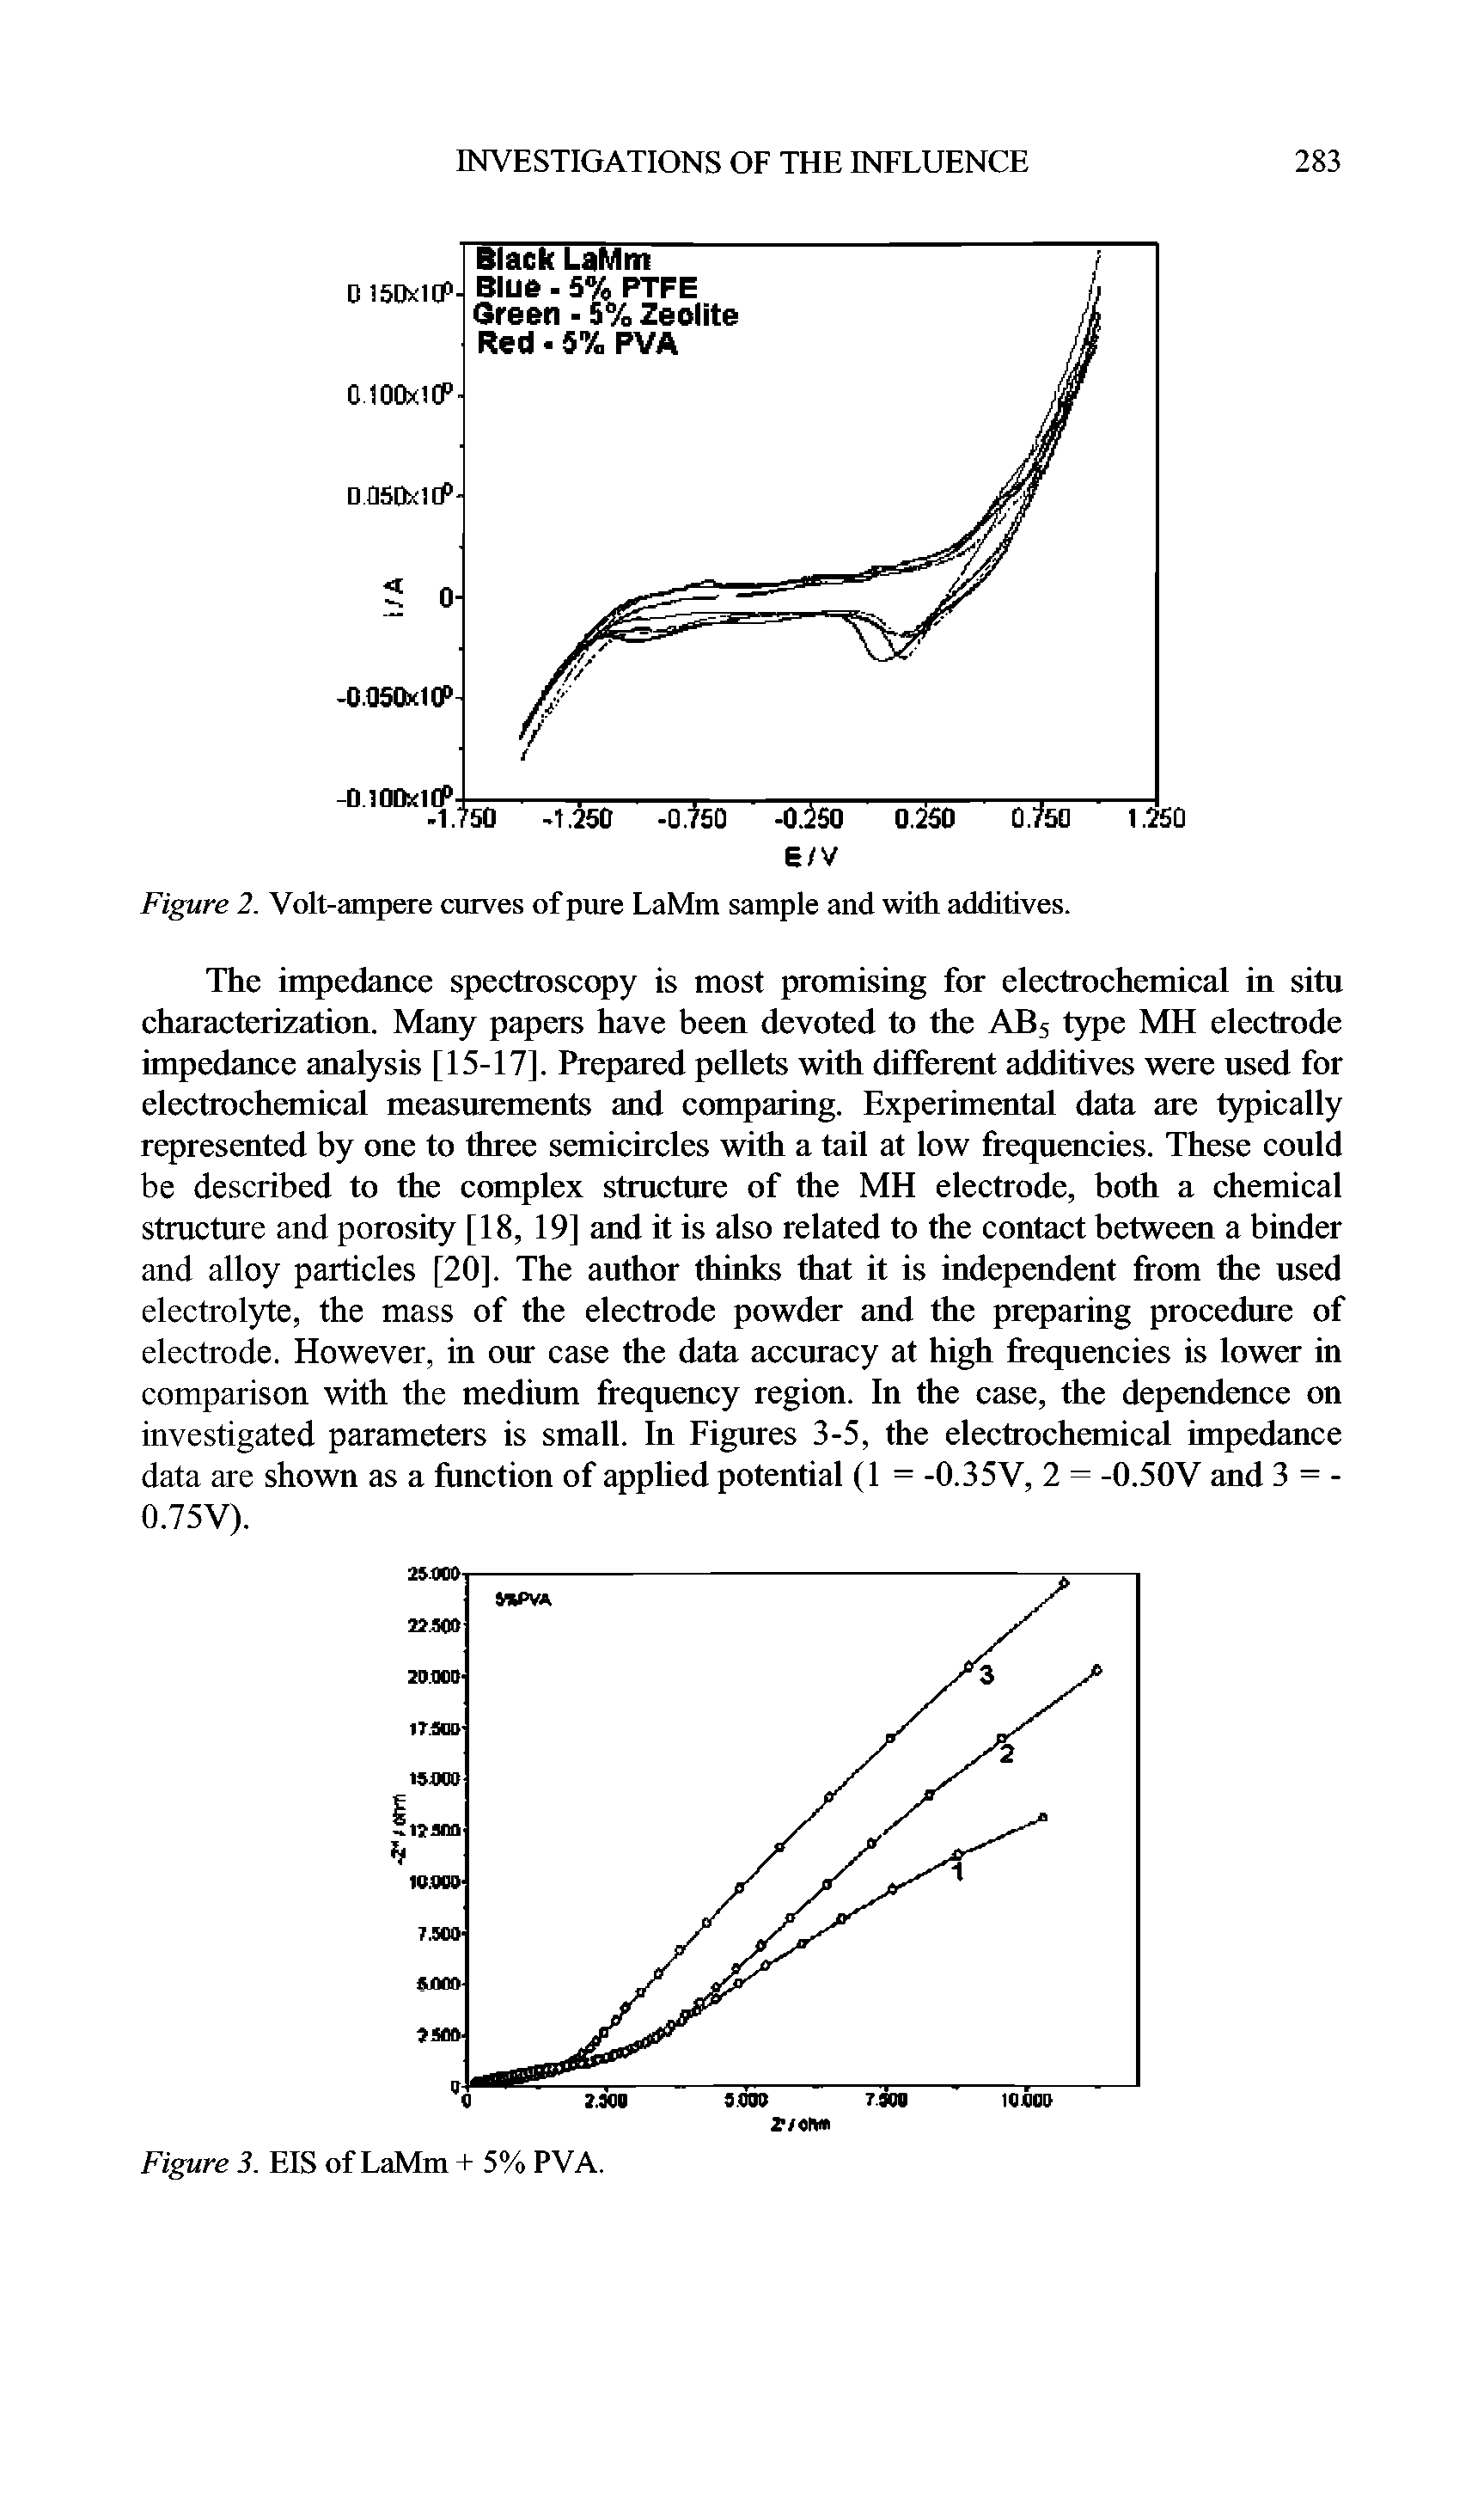 Figure 2. Volt-ampere curves of pure LaMm sample and with additives.